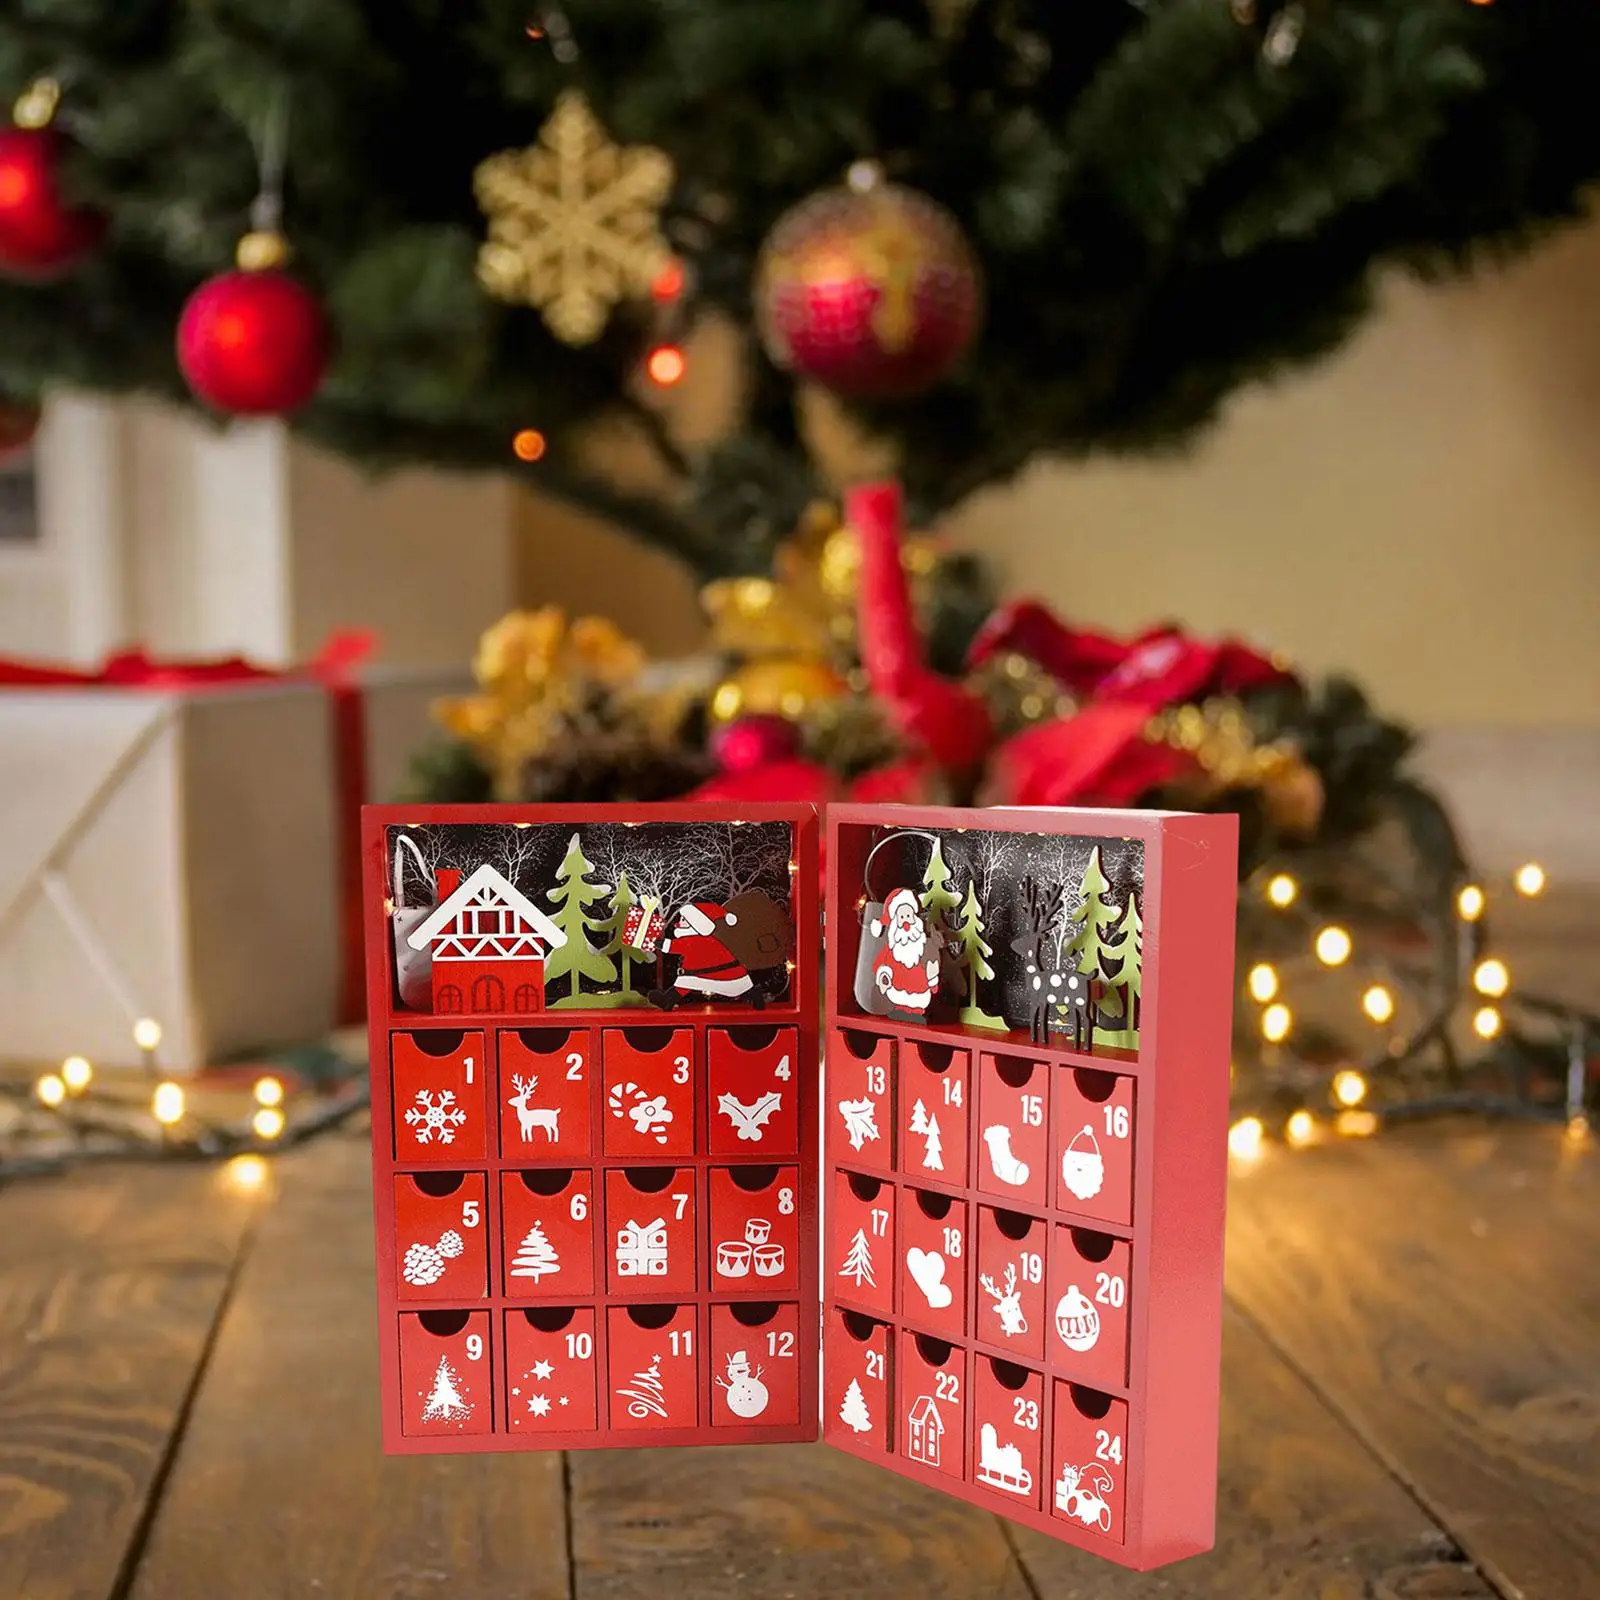 Fillable Advent Calendar Santa Claus Pattern Candy Organizer with Storage Drawers Wood for Holiday Xmas Desktop Home Decor